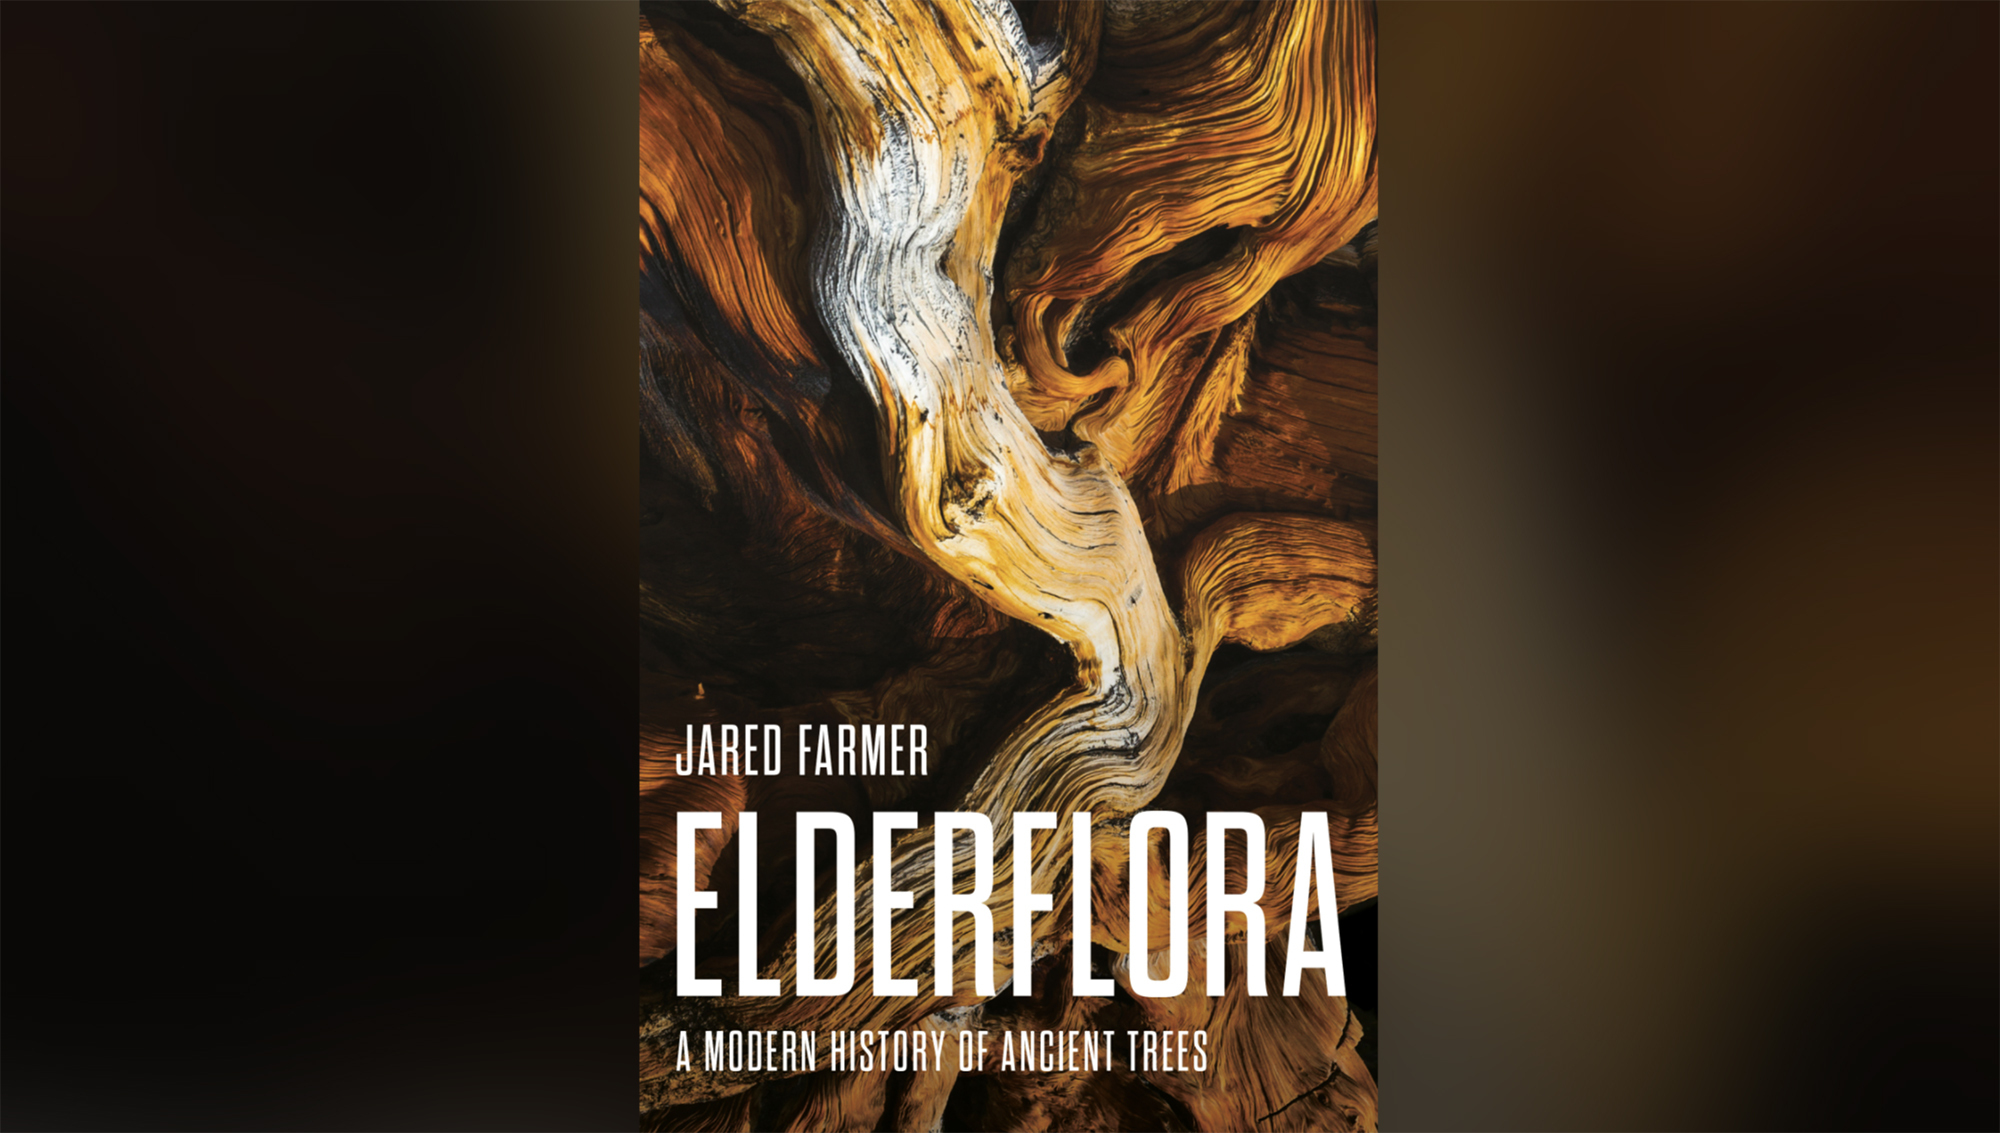 A book cover of Jared Farmer's new book Elderflora shows and up close image of a Bristlecone Pine.